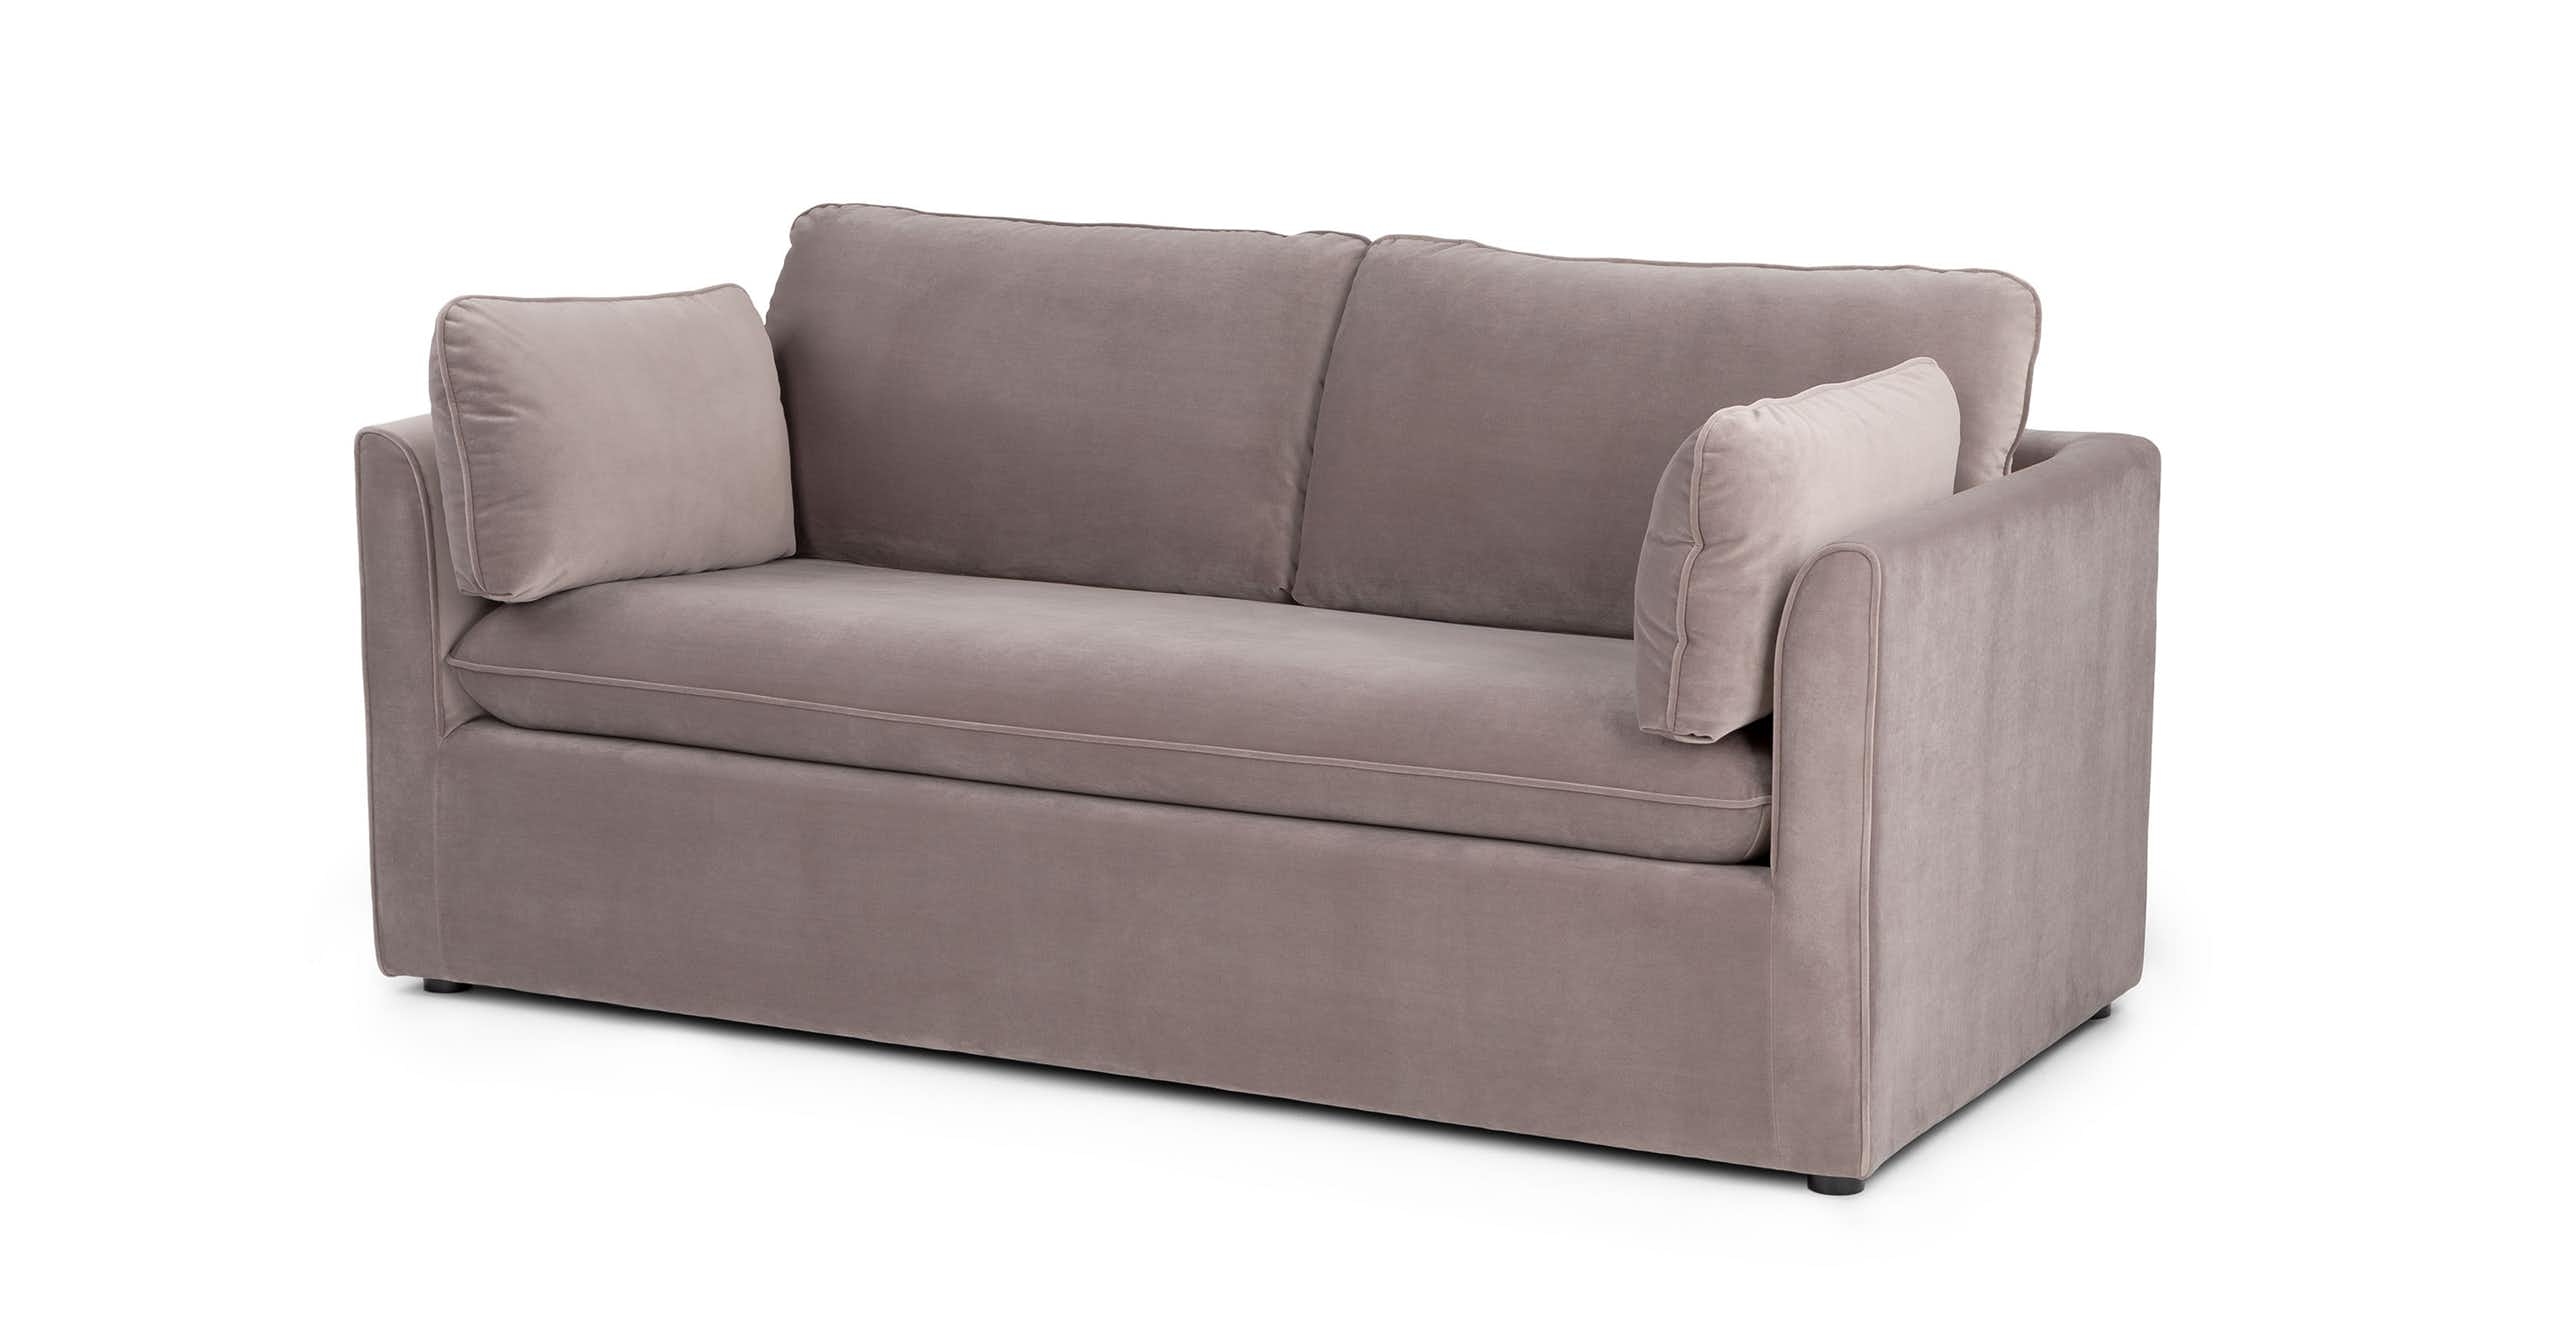 Oneira Dream Taupe Sofa Bed - Image 1